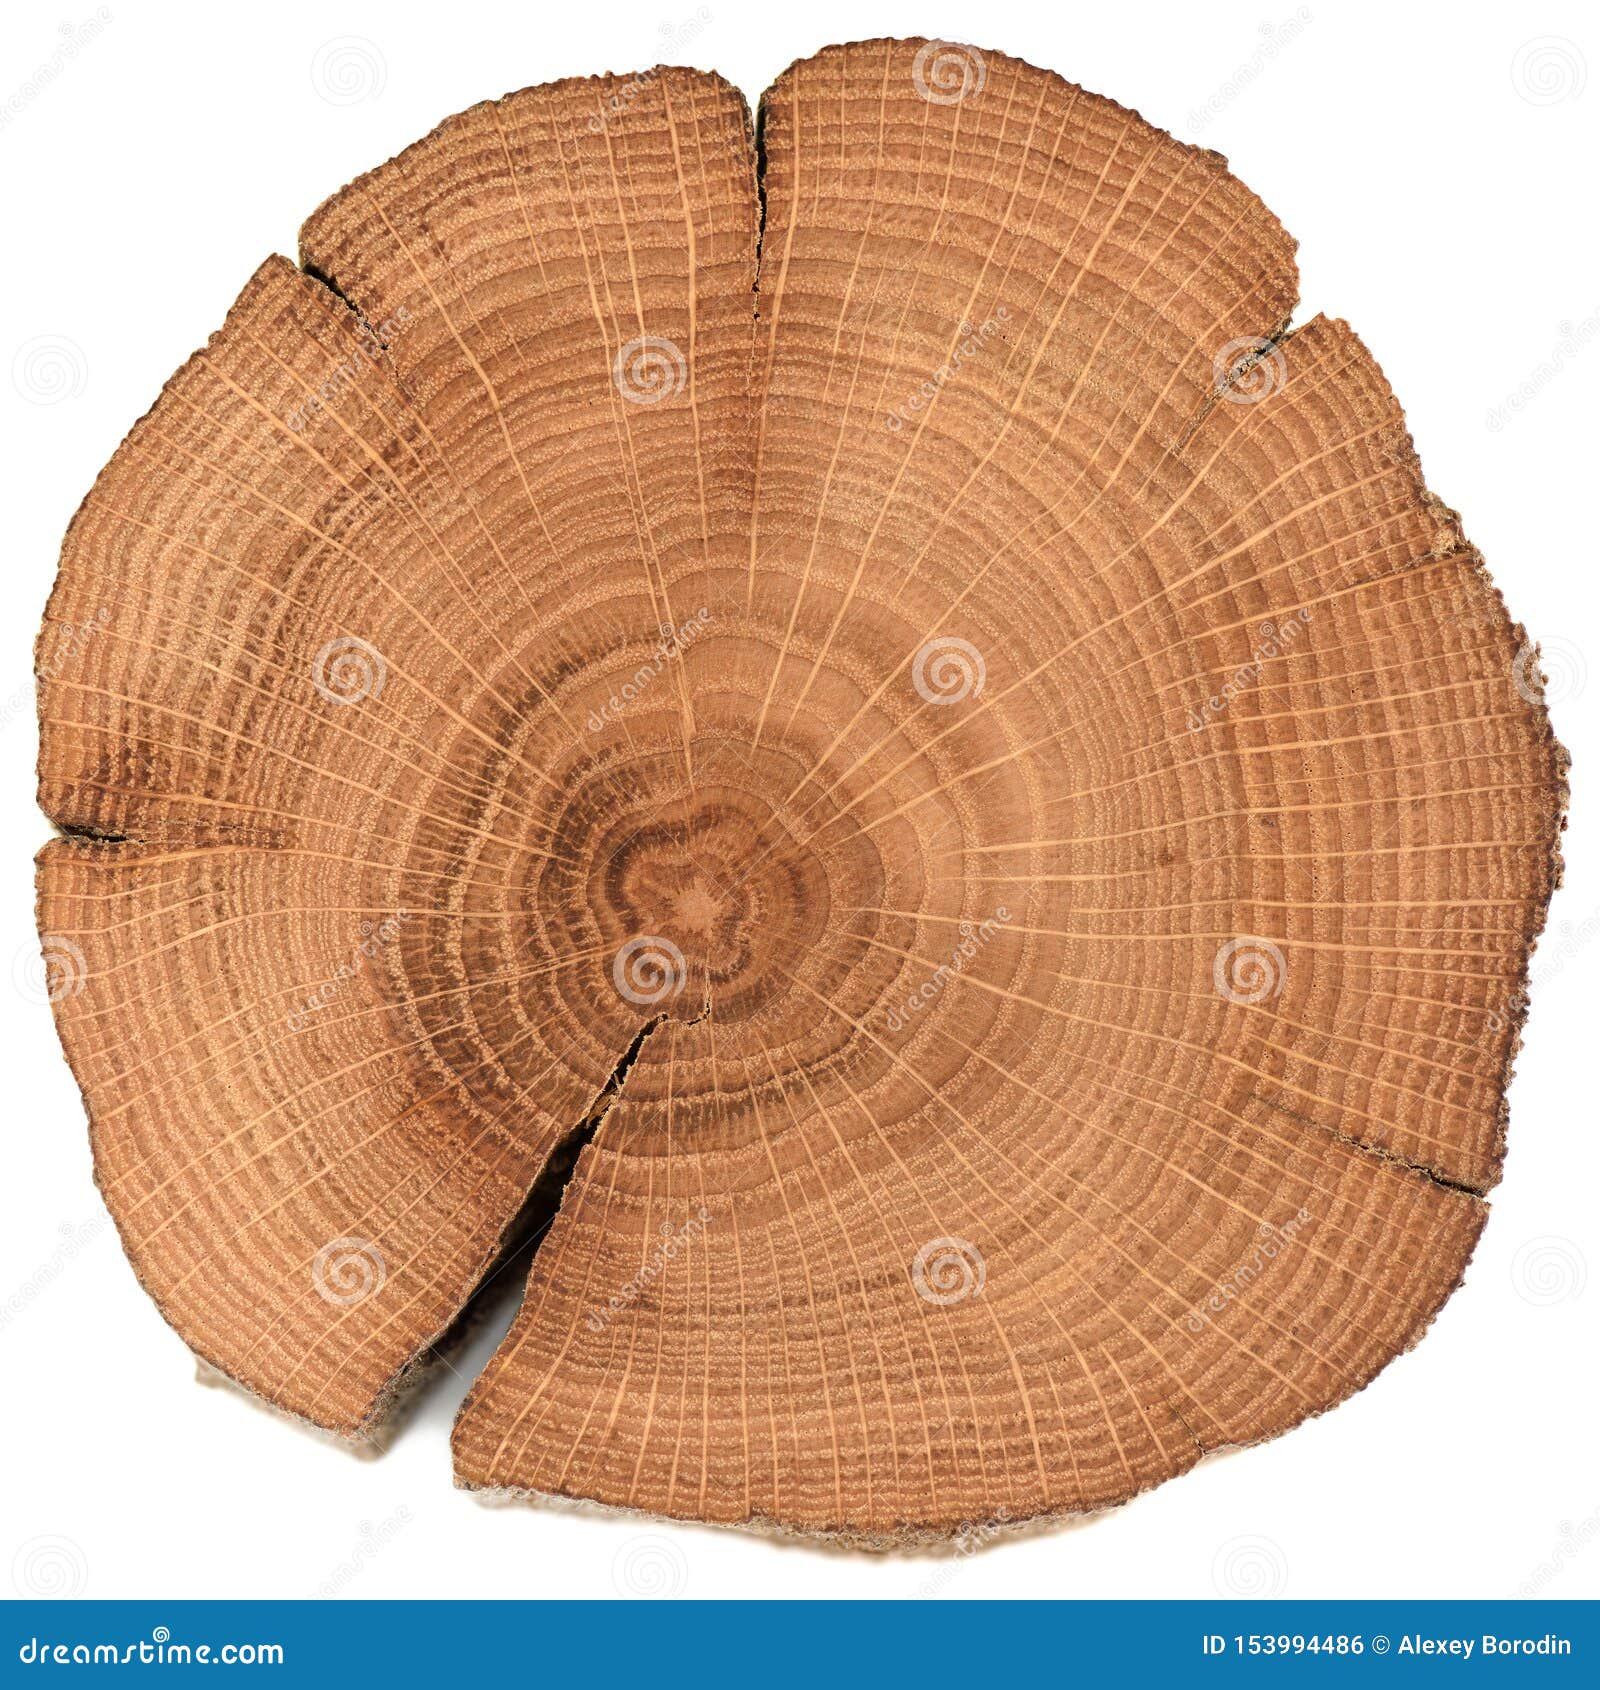 growth rings | PETER FOLLANSBEE: JOINER'S NOTES